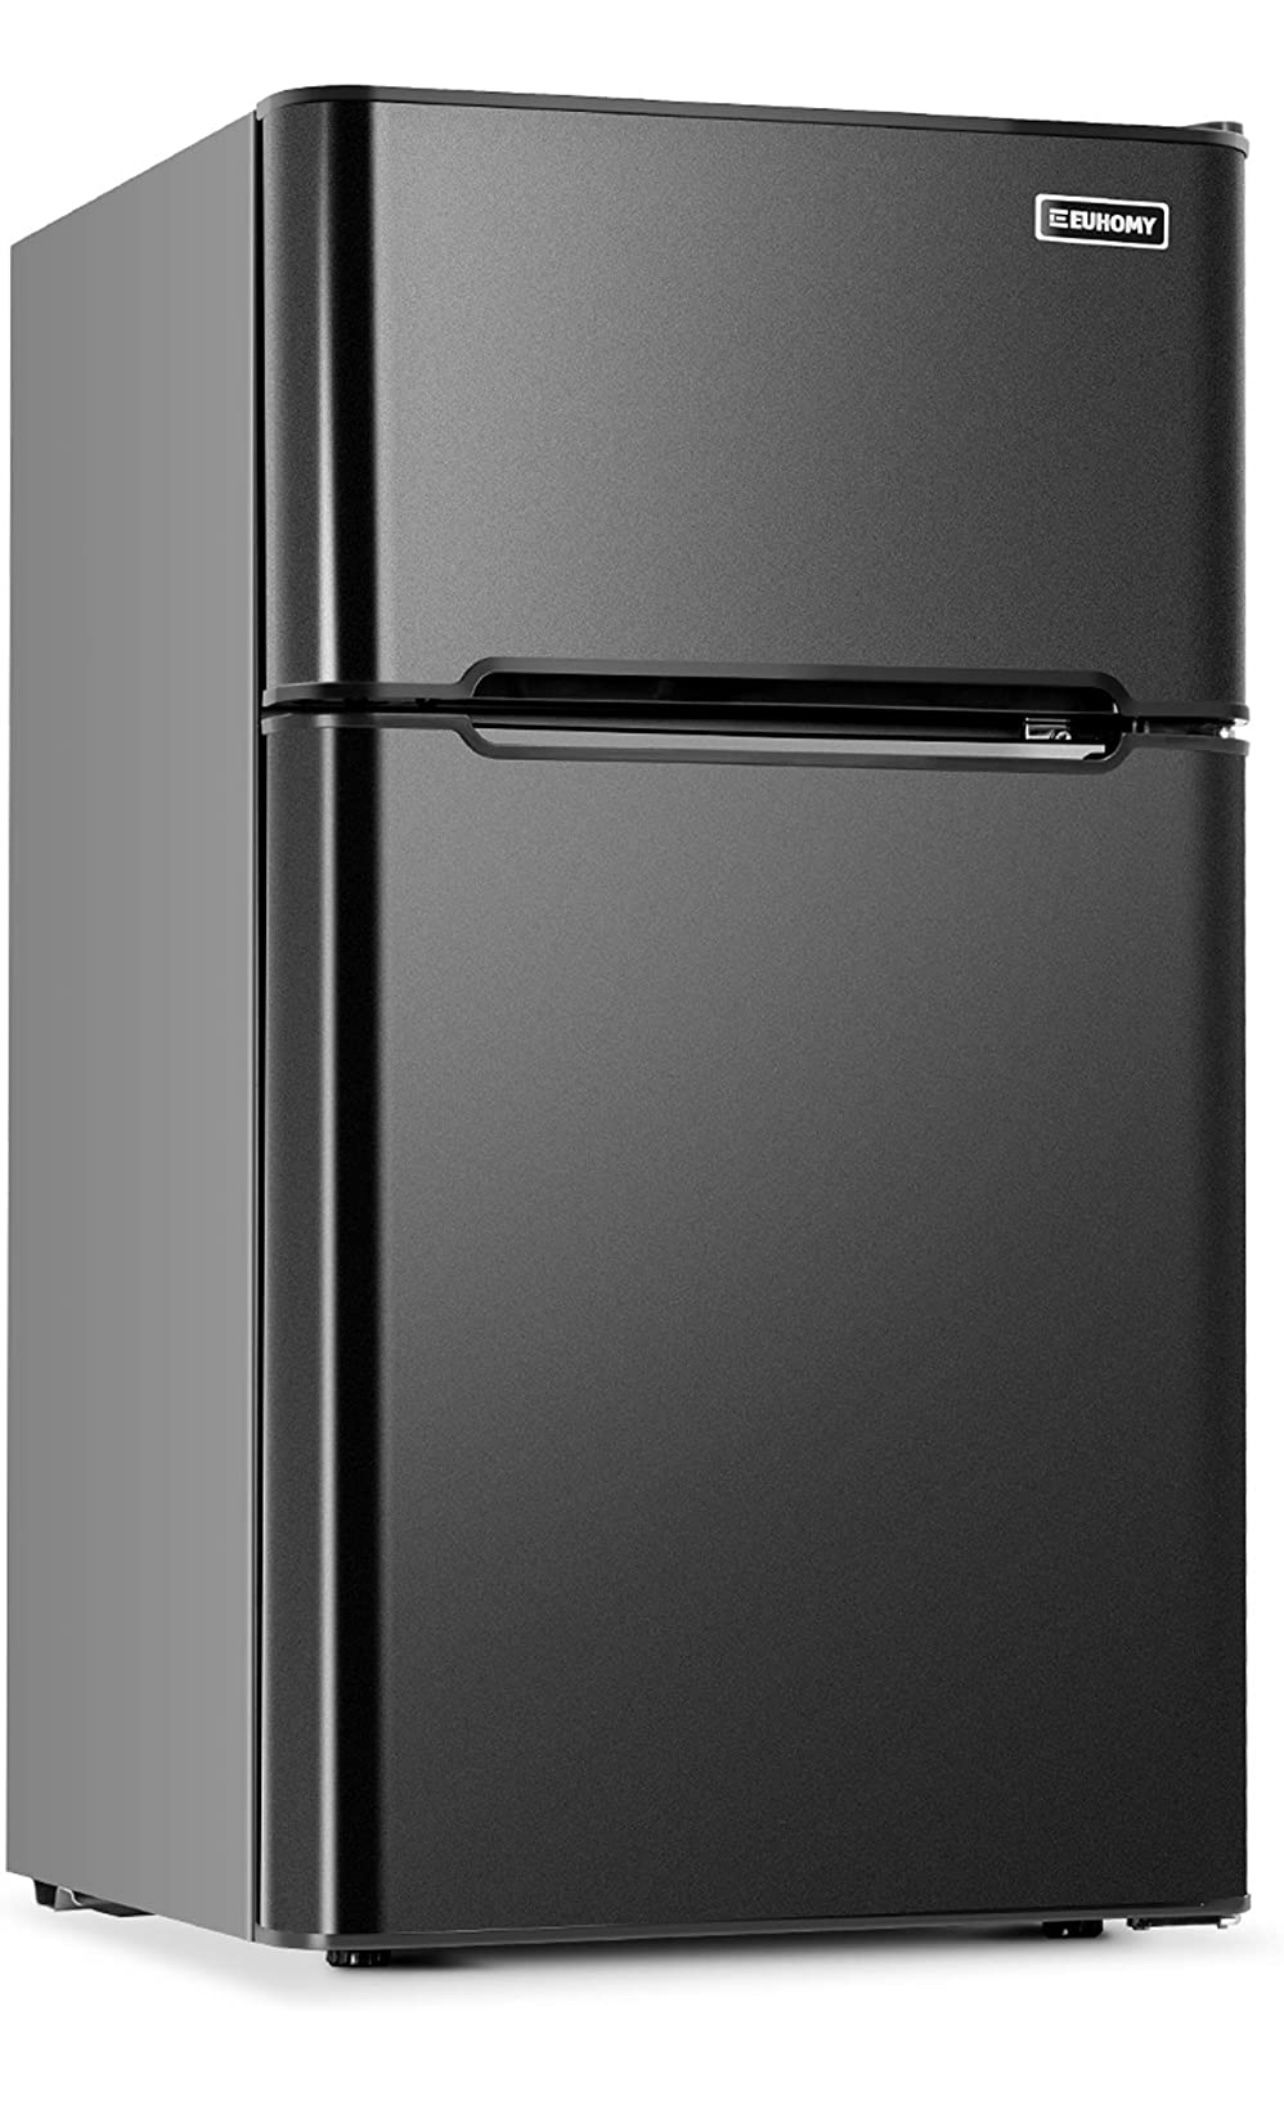 Euhomy Mini Fridge with Freezer, 3.2 Cu.Ft Compact Refrigerator with  freezer, 2 Door Mini Fridge with freezer, Upright for Dorm, Bedroom,  Office, Apar for Sale in Buford, GA - OfferUp